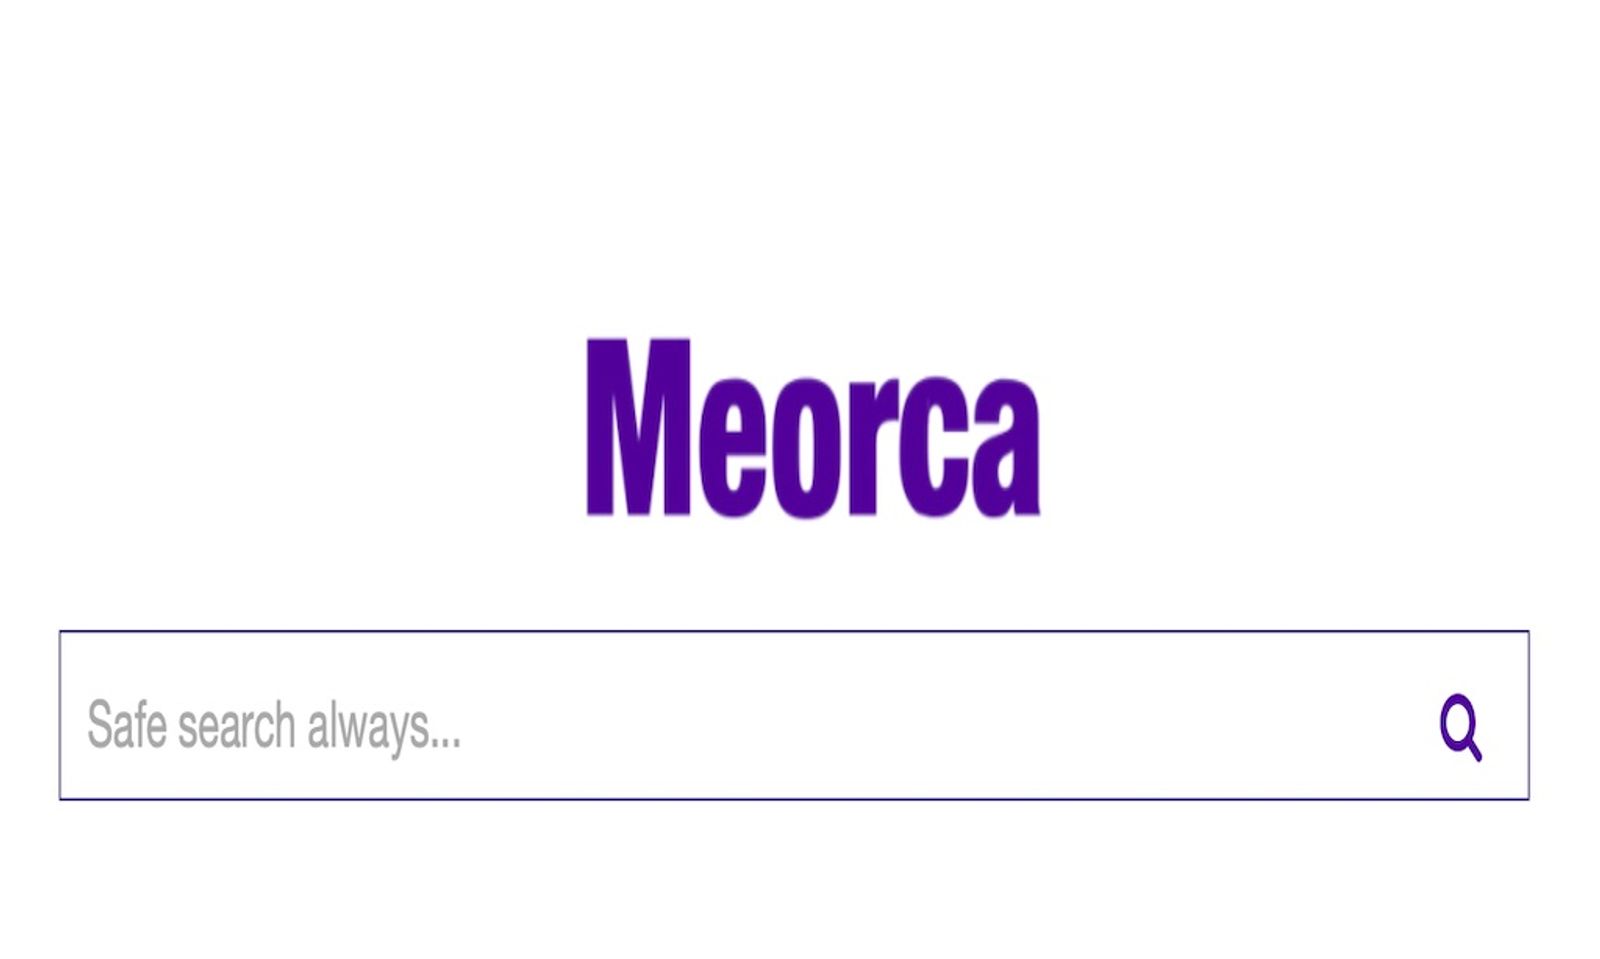 New U.K. Search Engine Meorca Makes Ban on Porn a Selling Point